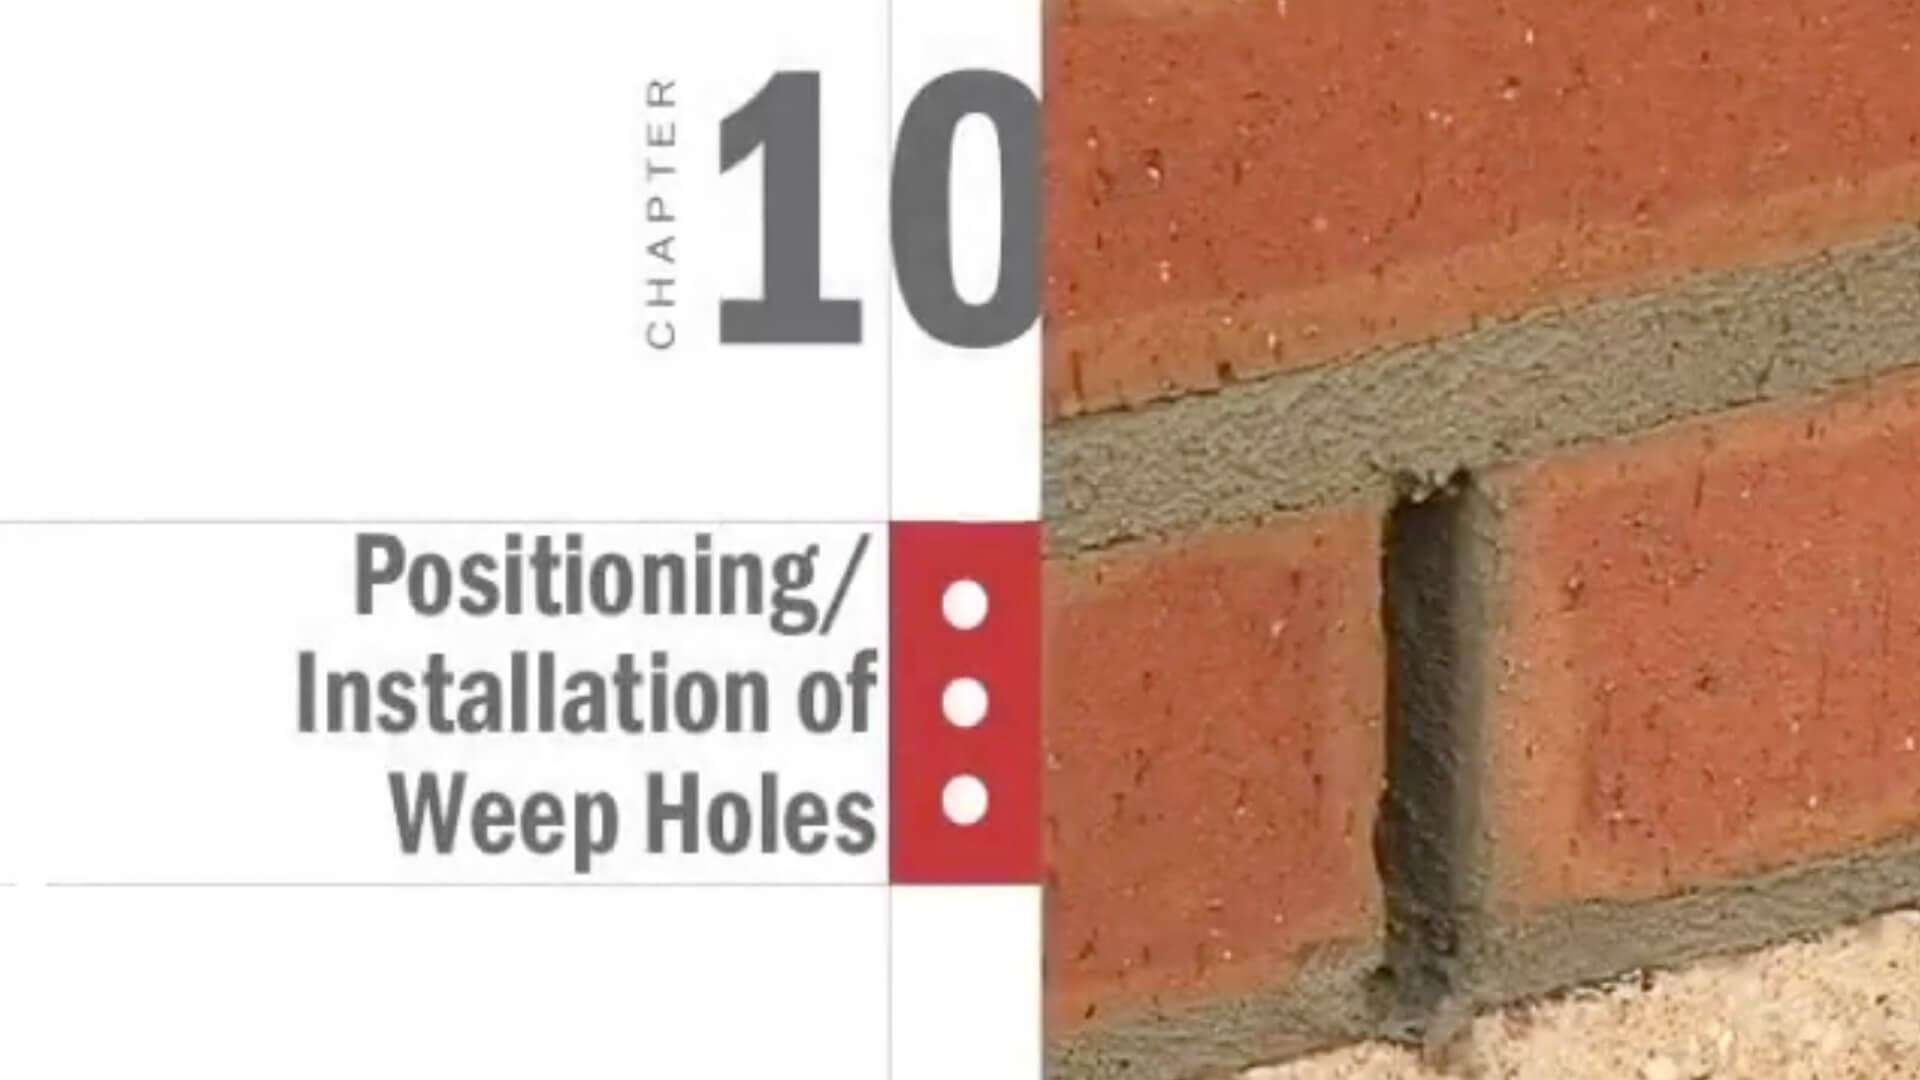 Positioning & Installation of Weep Holes